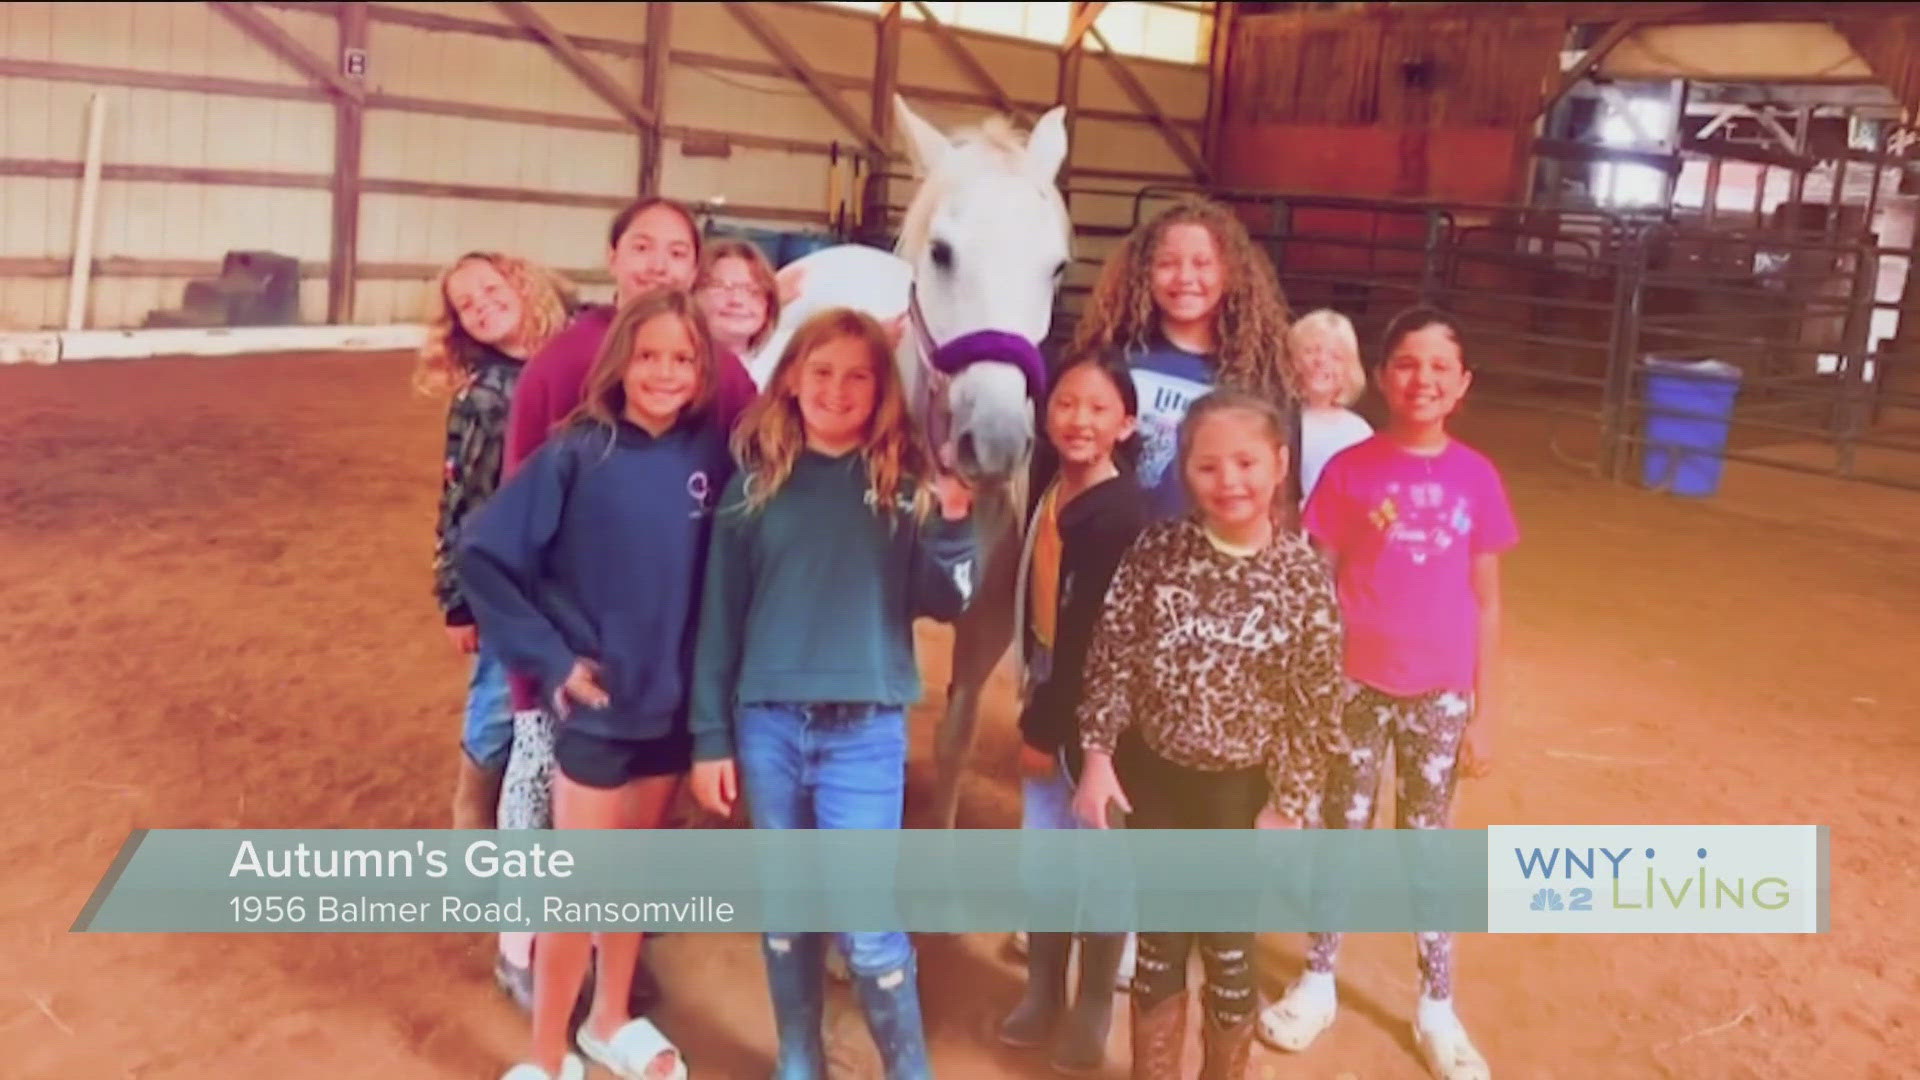 Sat 6/22- Autumn's Gate Summer Camp (THIS VIDEO IS SPONSORED BY AUTUMN'S GATE SUMMER CAMPS)